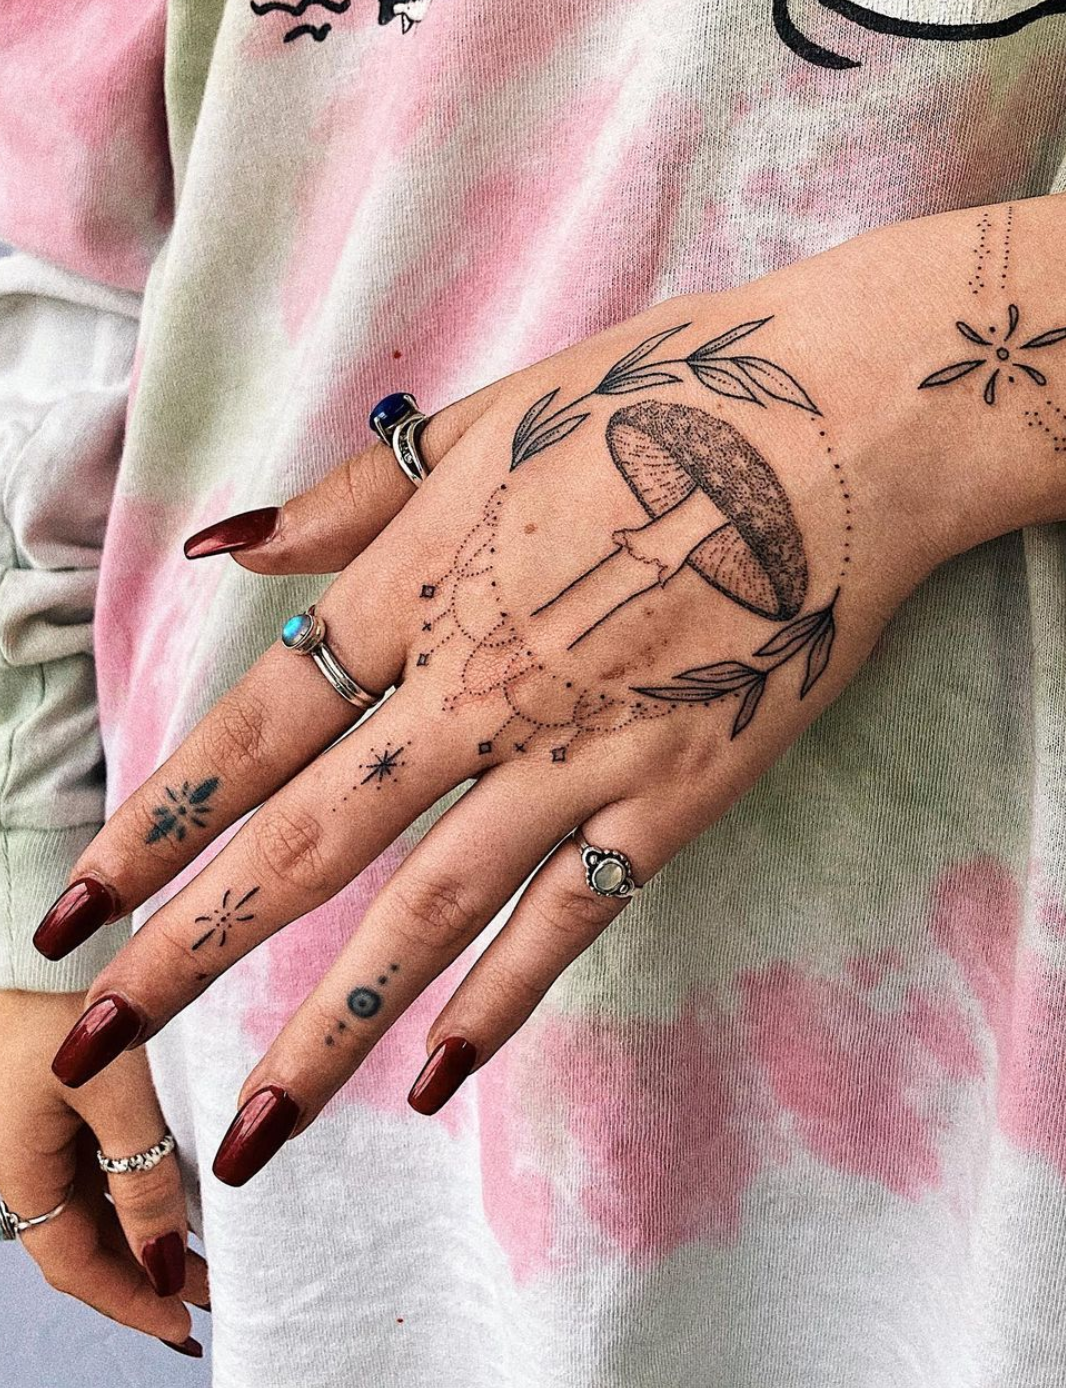 98 Tattoos For Men That Will Tempt Your Ink Desires